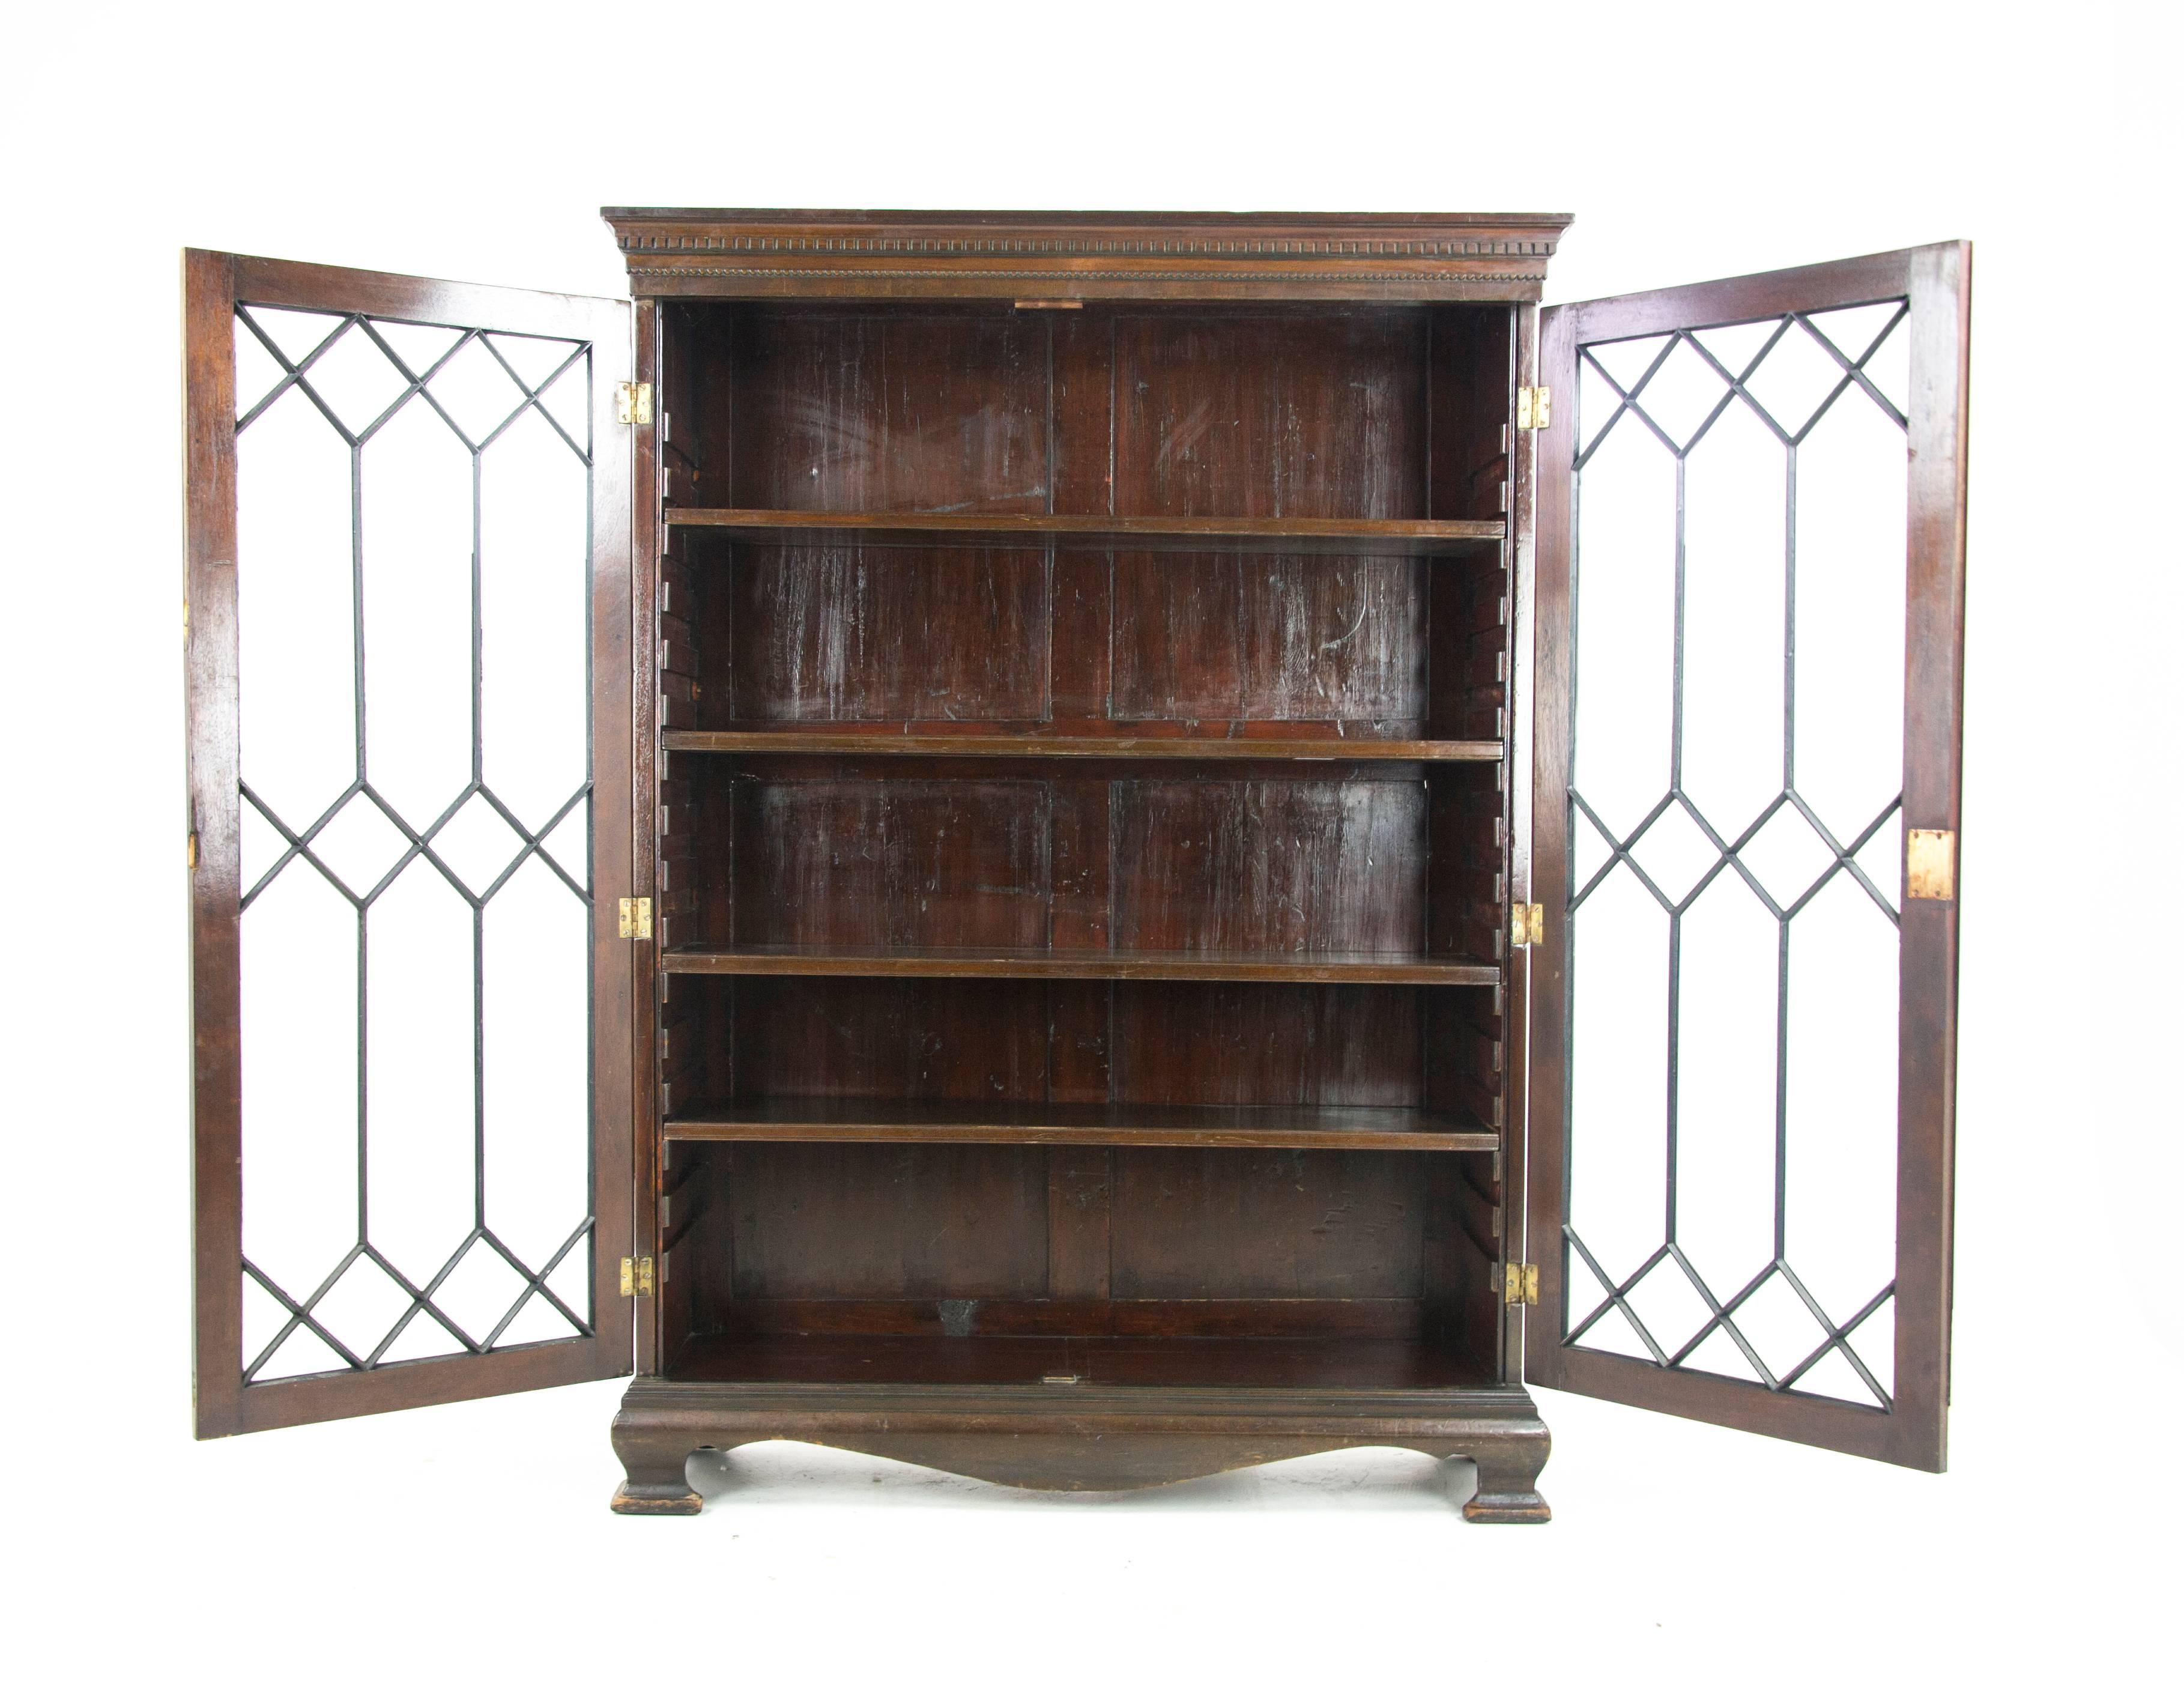 Walnut bookcase, antique display cabinet, astragal glass, Scotland, 1890, antique furniture

Scotland 1890
Solid Walnut construction
Original finish
Rectangular top with dentil cornice
Pair of glazed astragal doors
Interior has four slide out